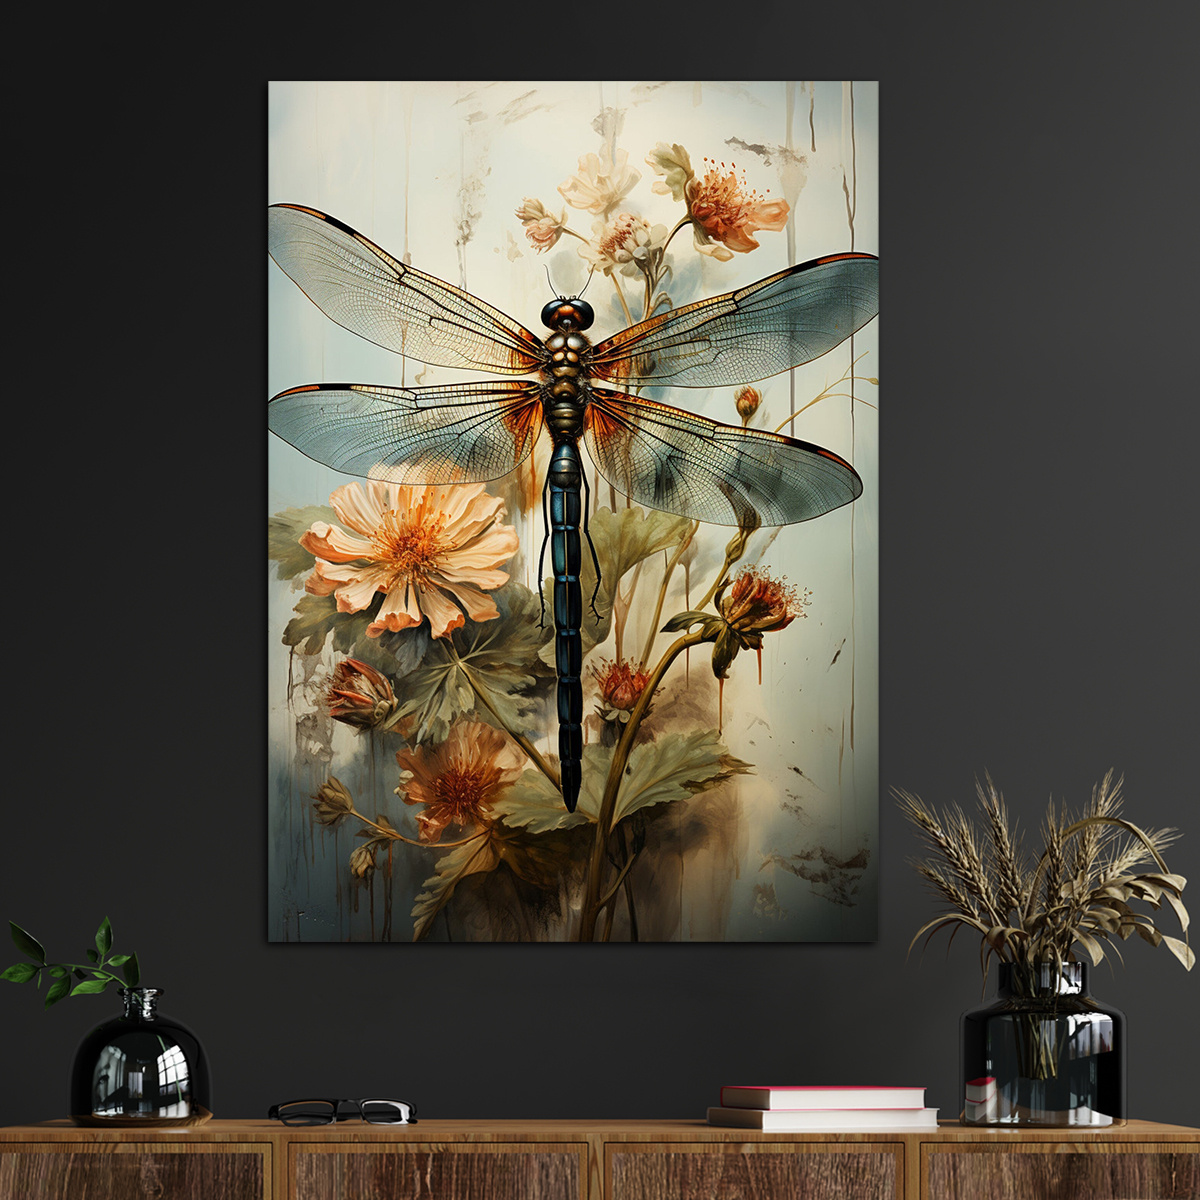 

1pc Dragonfly Above Flowers Canvas Wall Art For Home Decor, Modern Canvas Prints For Living Room Bedroom Kitchen Office Cafe Decor, Perfect Gift And Decoration